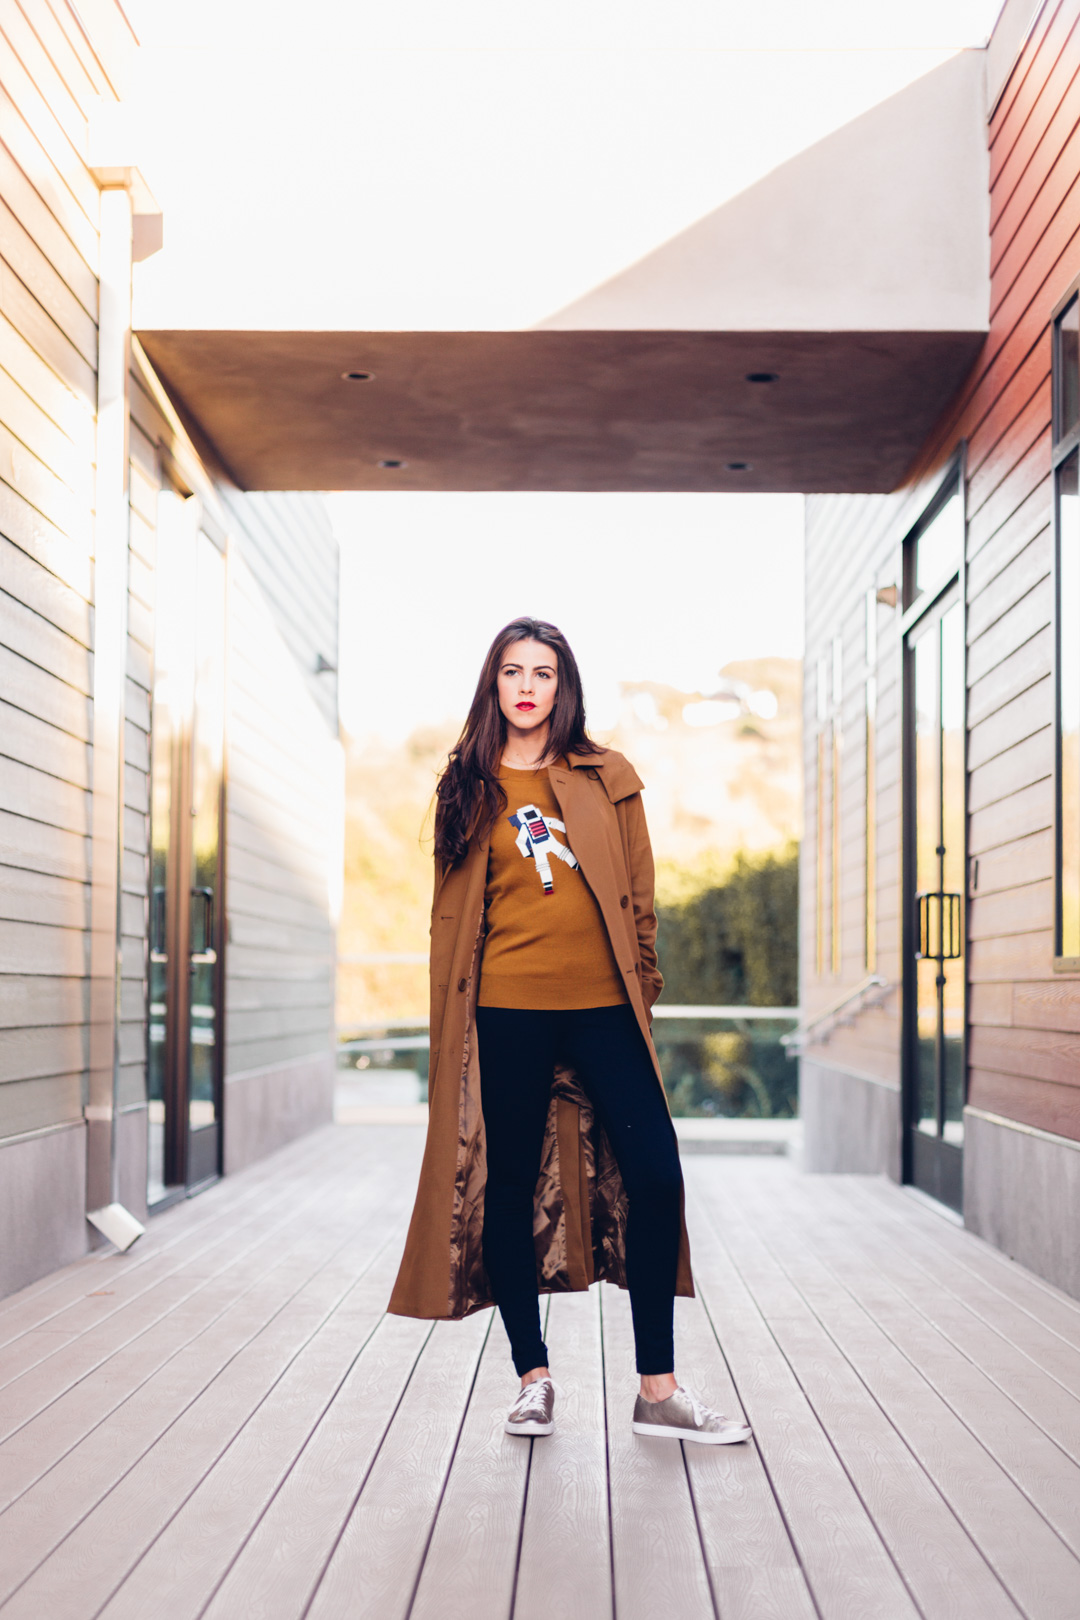 Jackie Roque styling a Lacoste Fall 2017 look with a brown trench coat and astronaut sweater.